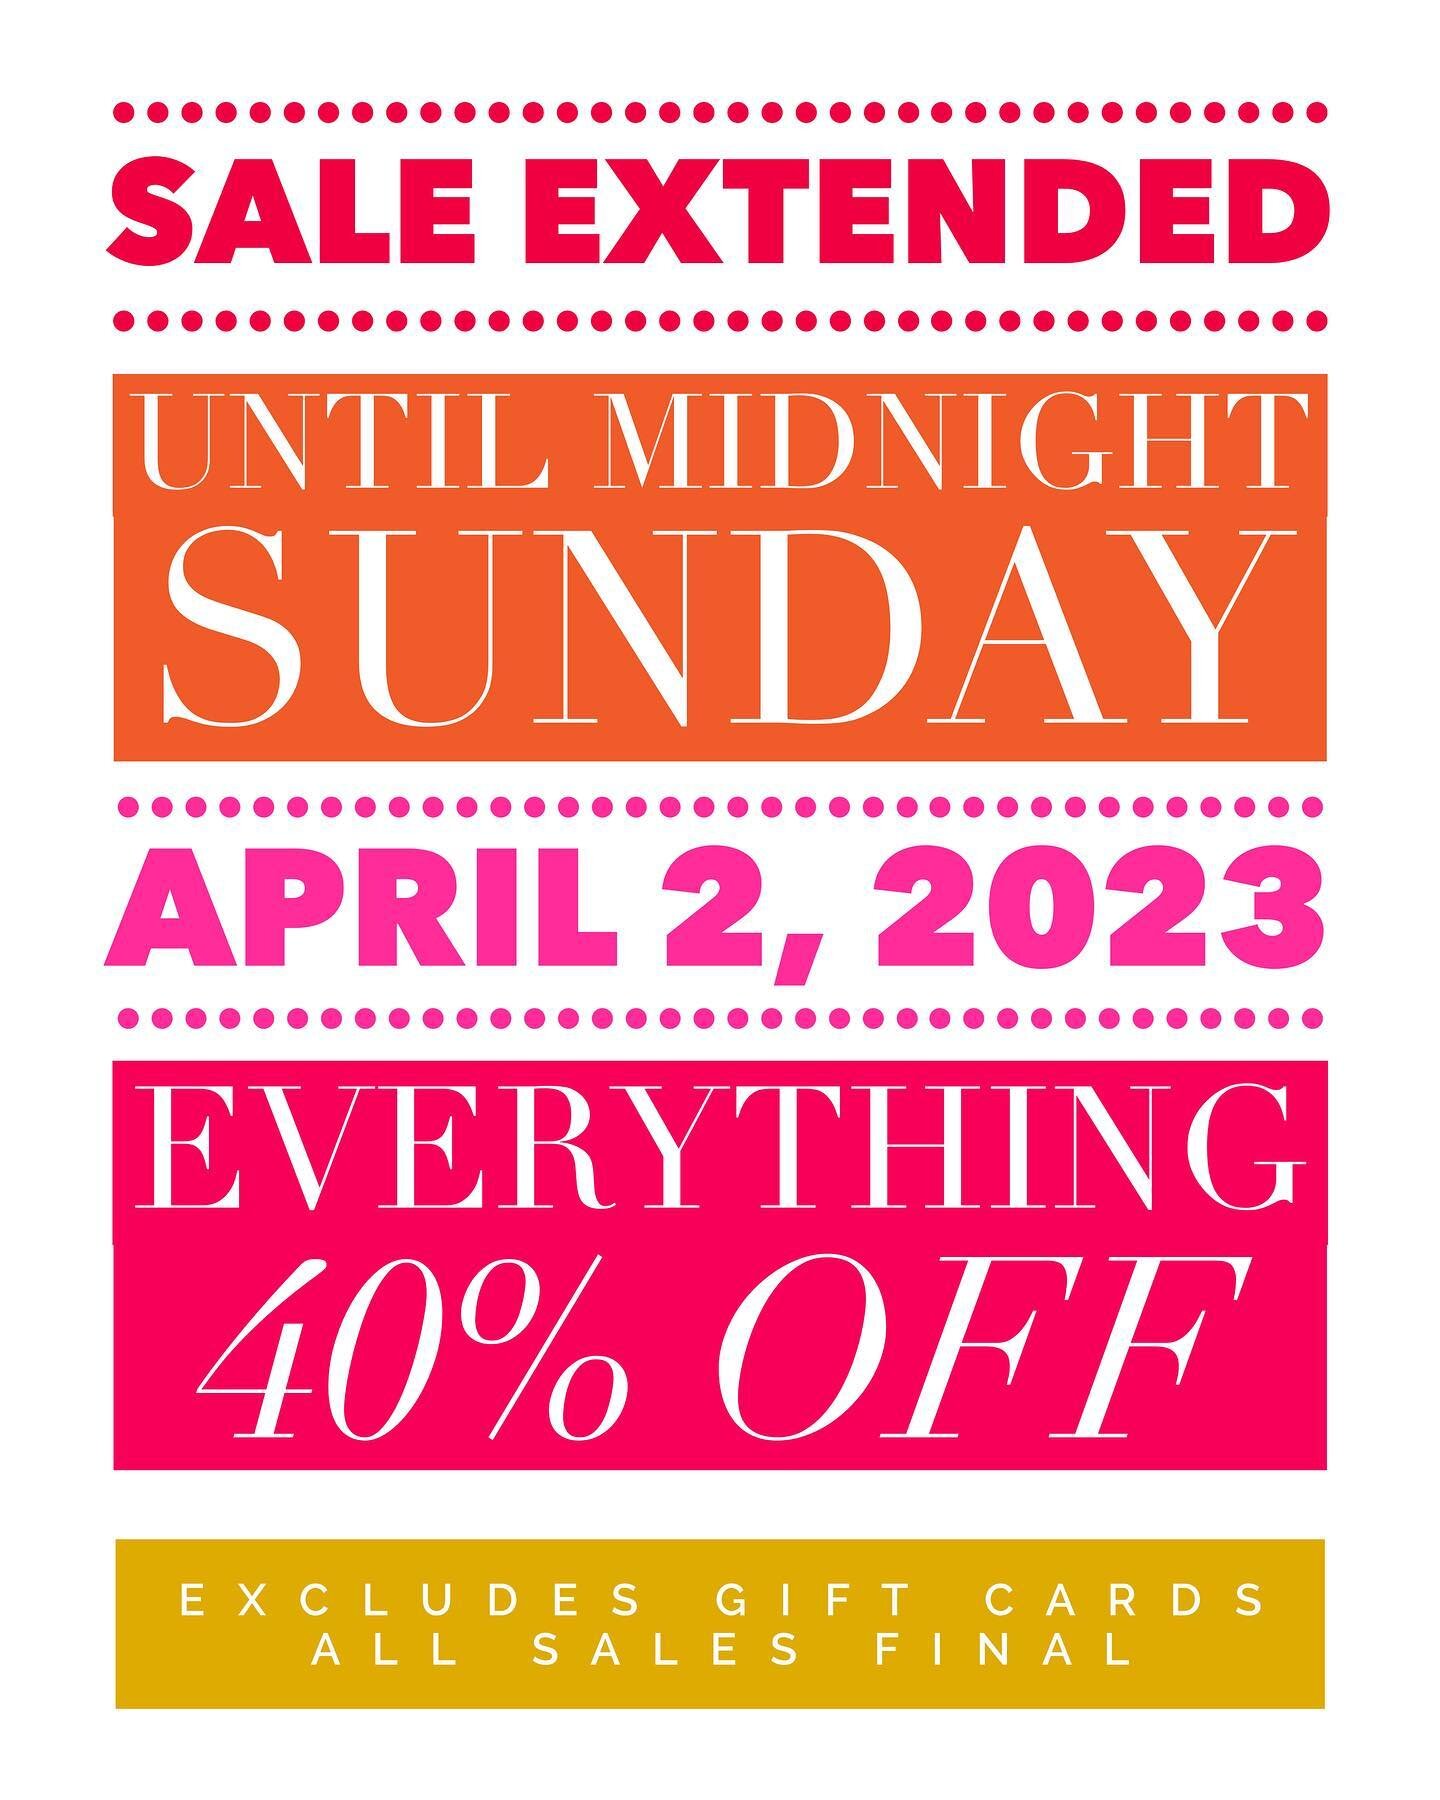 SPECIAL ANNOUNCEMENT. 

SALE EXTENDED THROUGH SUNDAY NIGHT 4/2/23. 

EVERYTHING 40% OFF  3/21/23 - 4/2/23
SALE EXCLUDES GIFT CARDS

The sale has been going well so I thought I&rsquo;d give you 2 extra days to save. Thanks for all your orders. 

Price